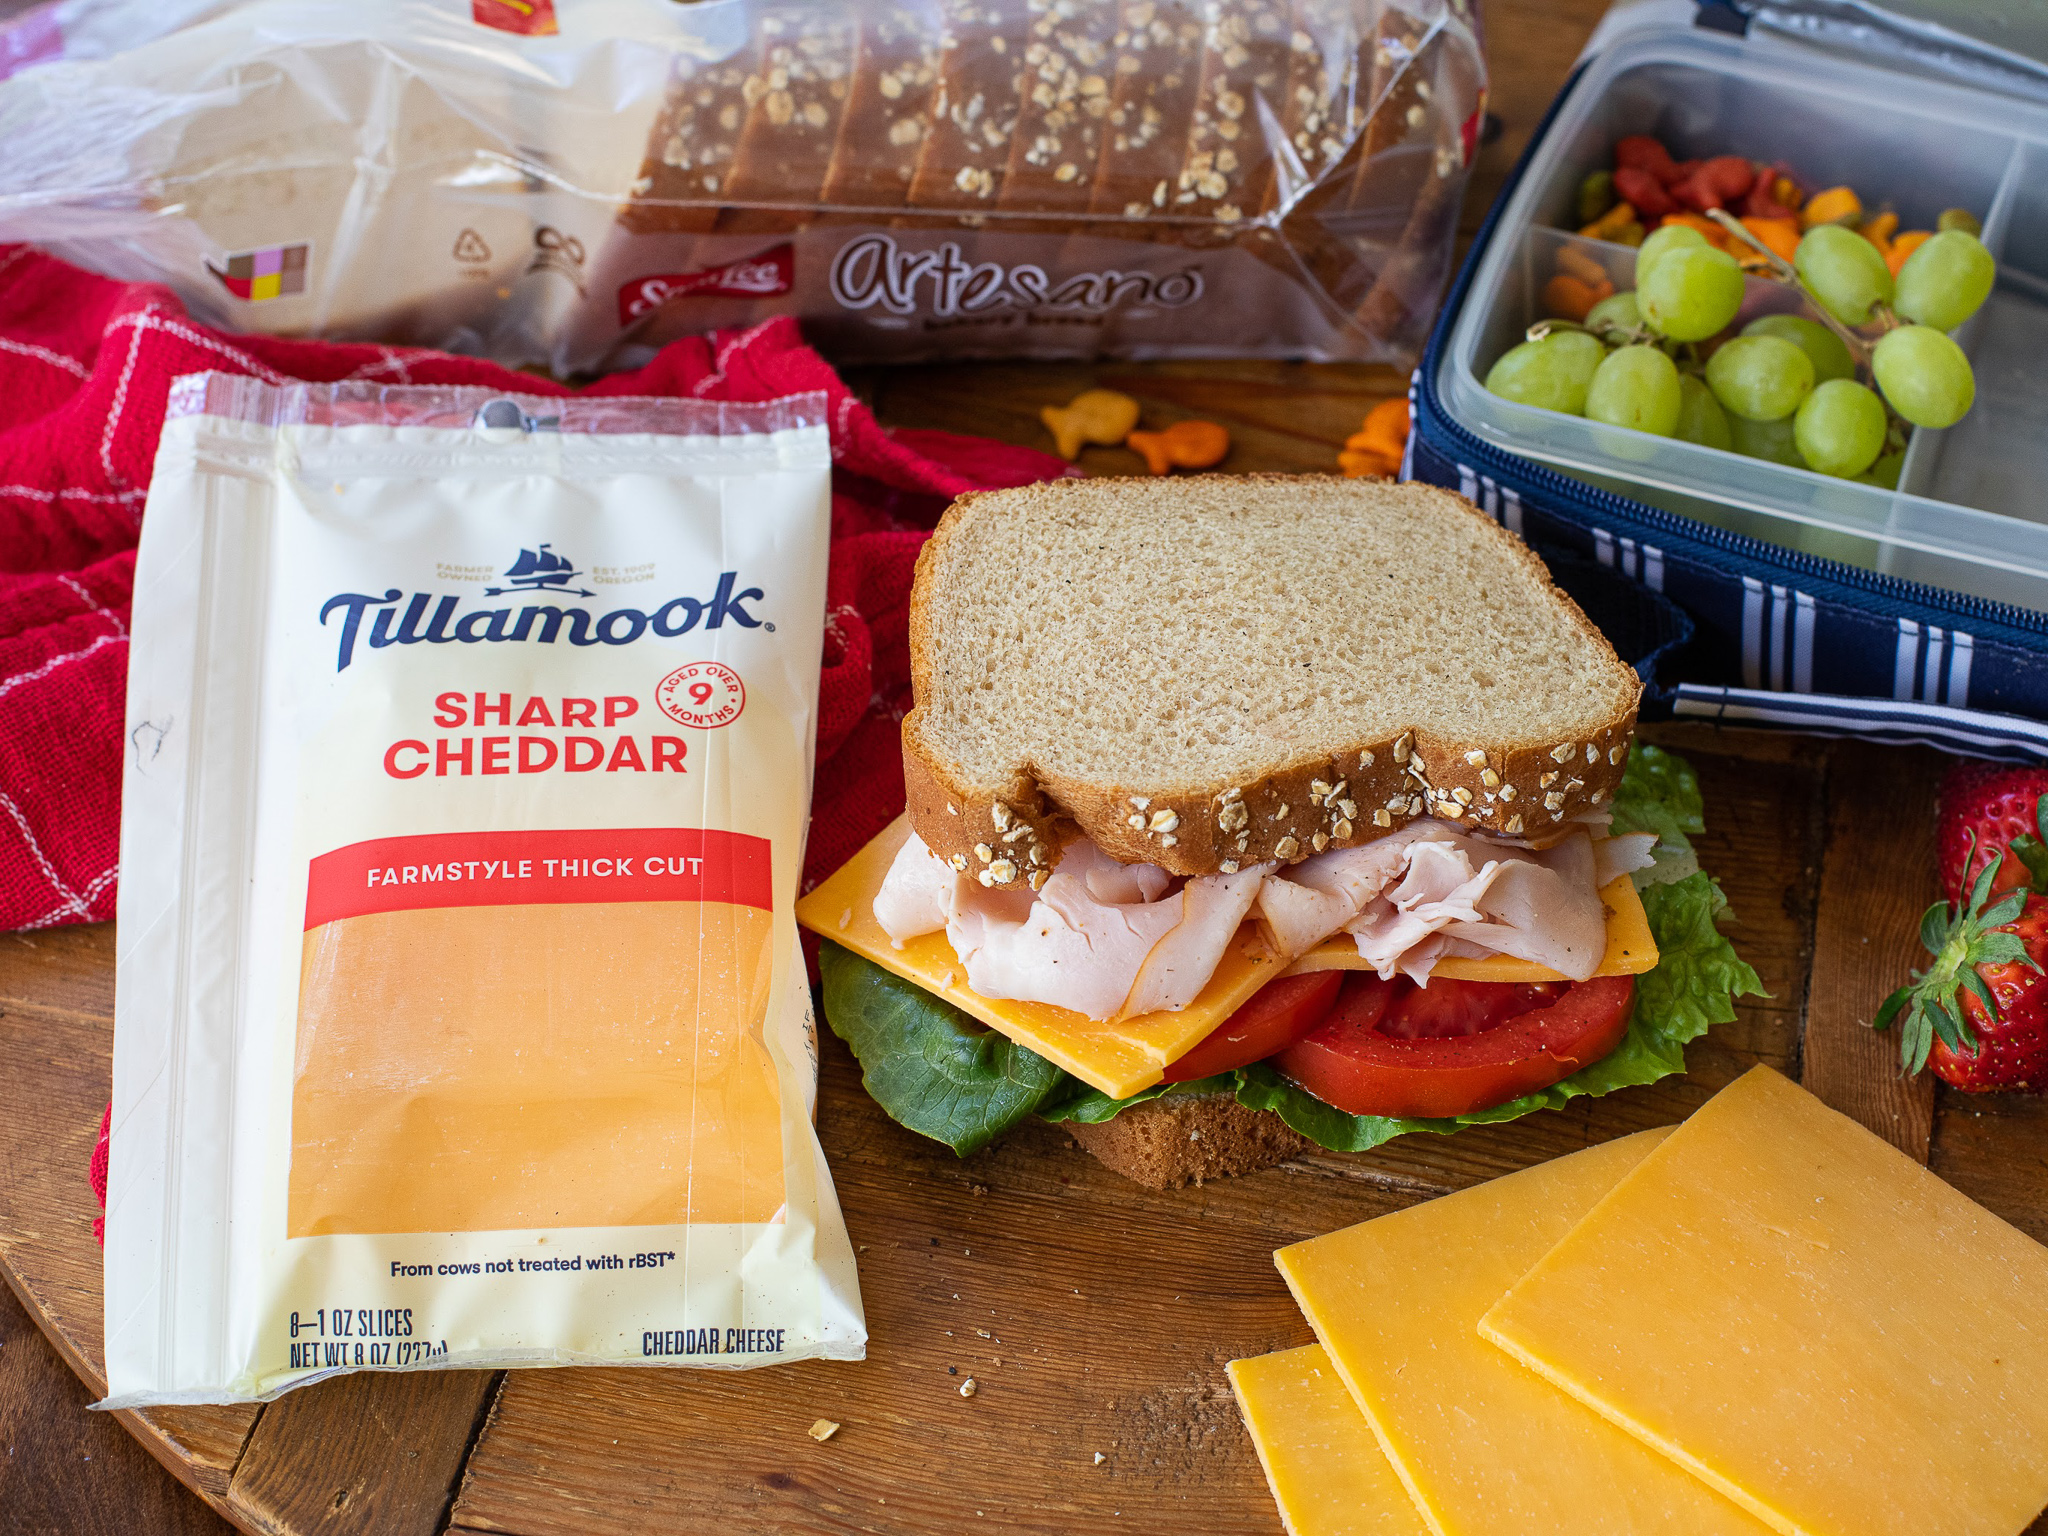 Save On Your Favorite Tillamook Cheese At Publix And Serve Up Something DELICIOUS! on I Heart Publix